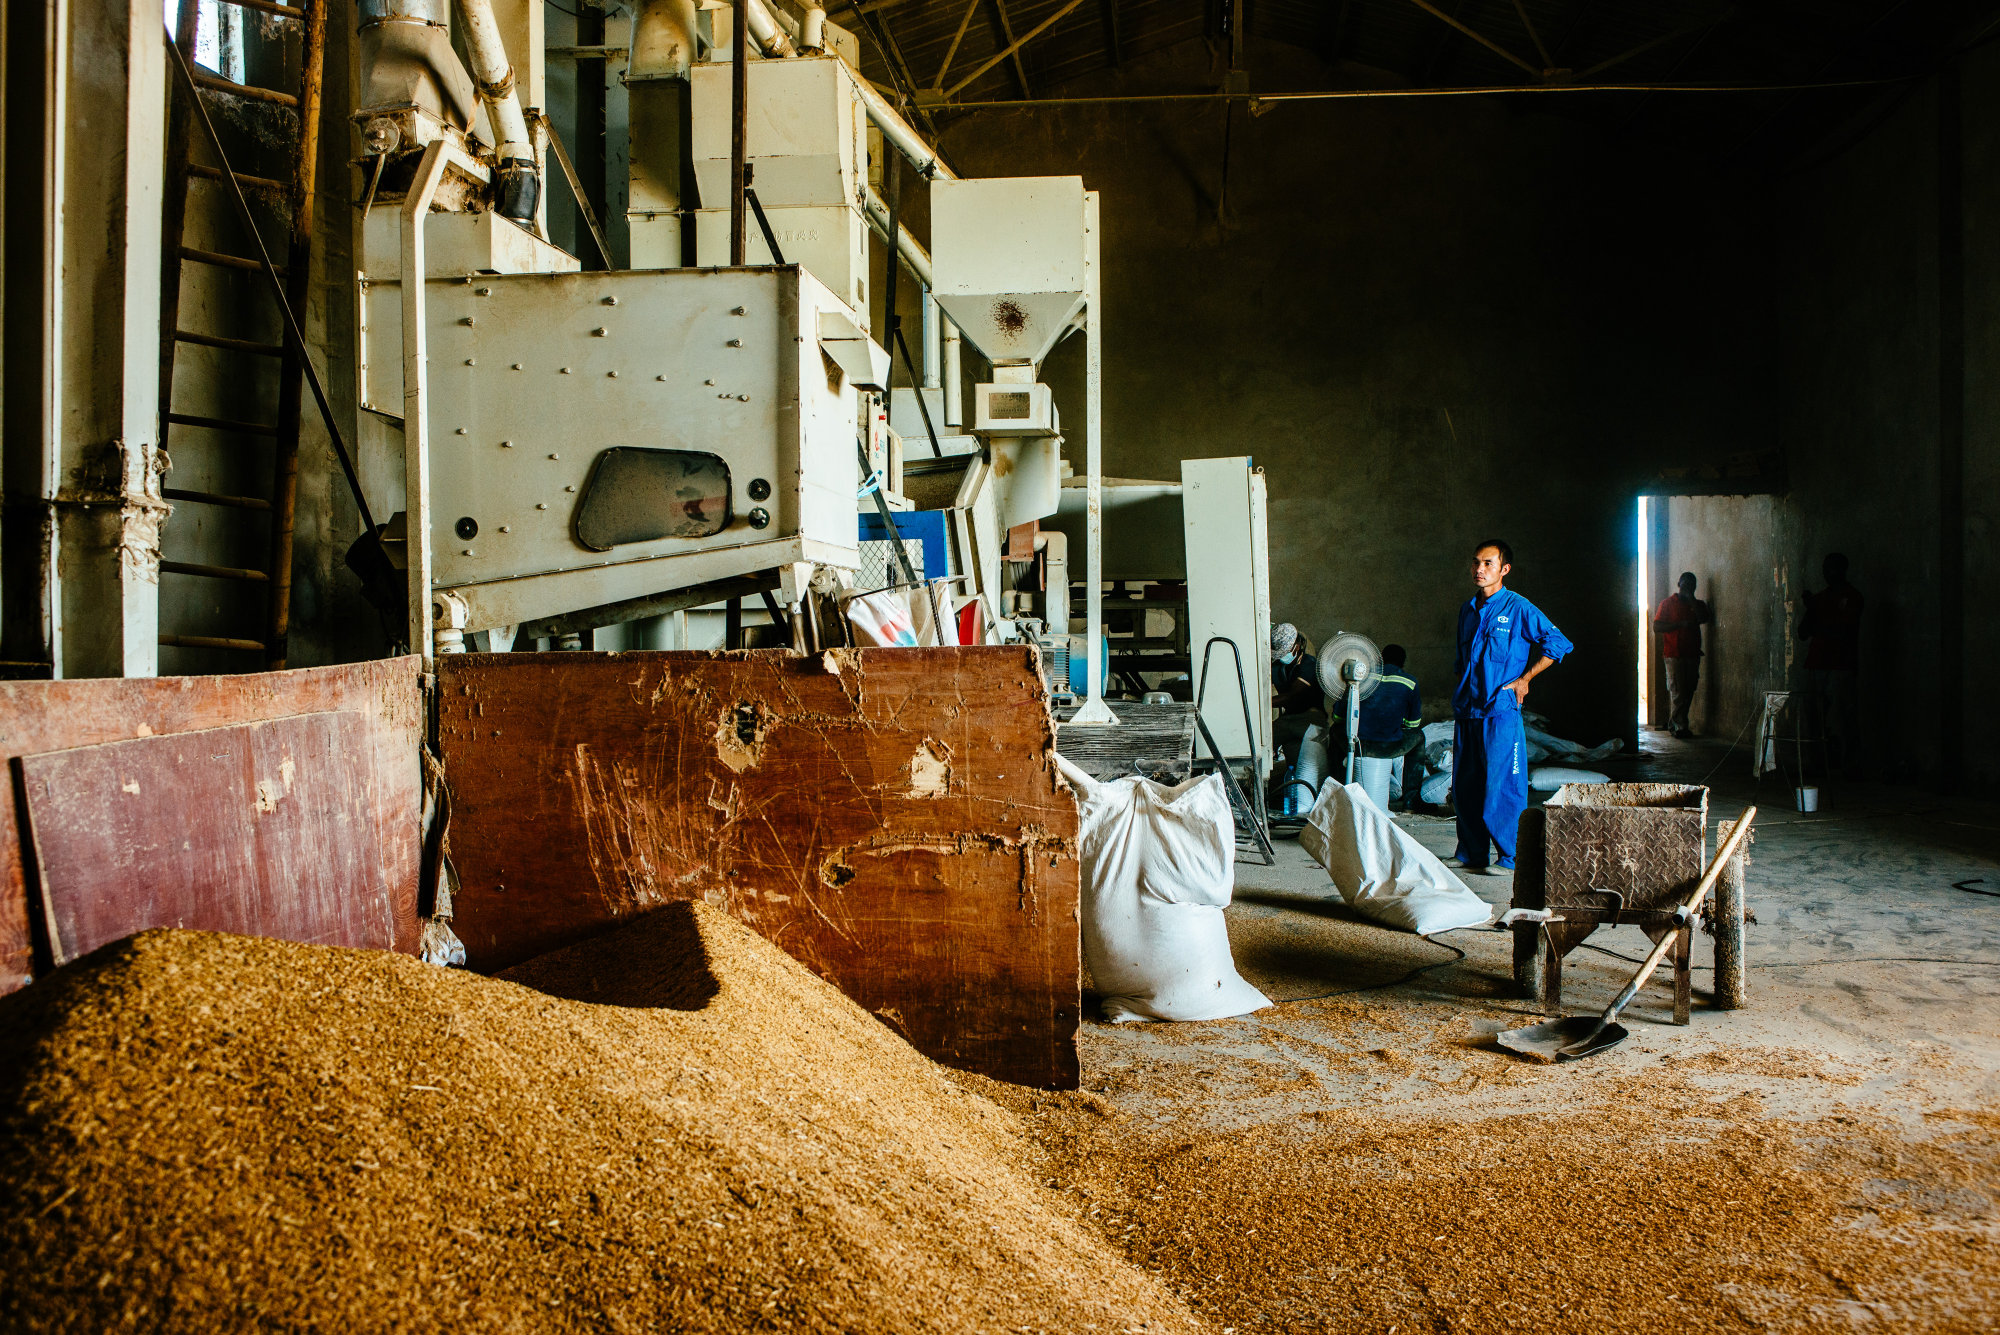 Chinese company Wanbao Grains &amp; Oils Co. processes rice in the Limpopo Valley, Mozambique.
